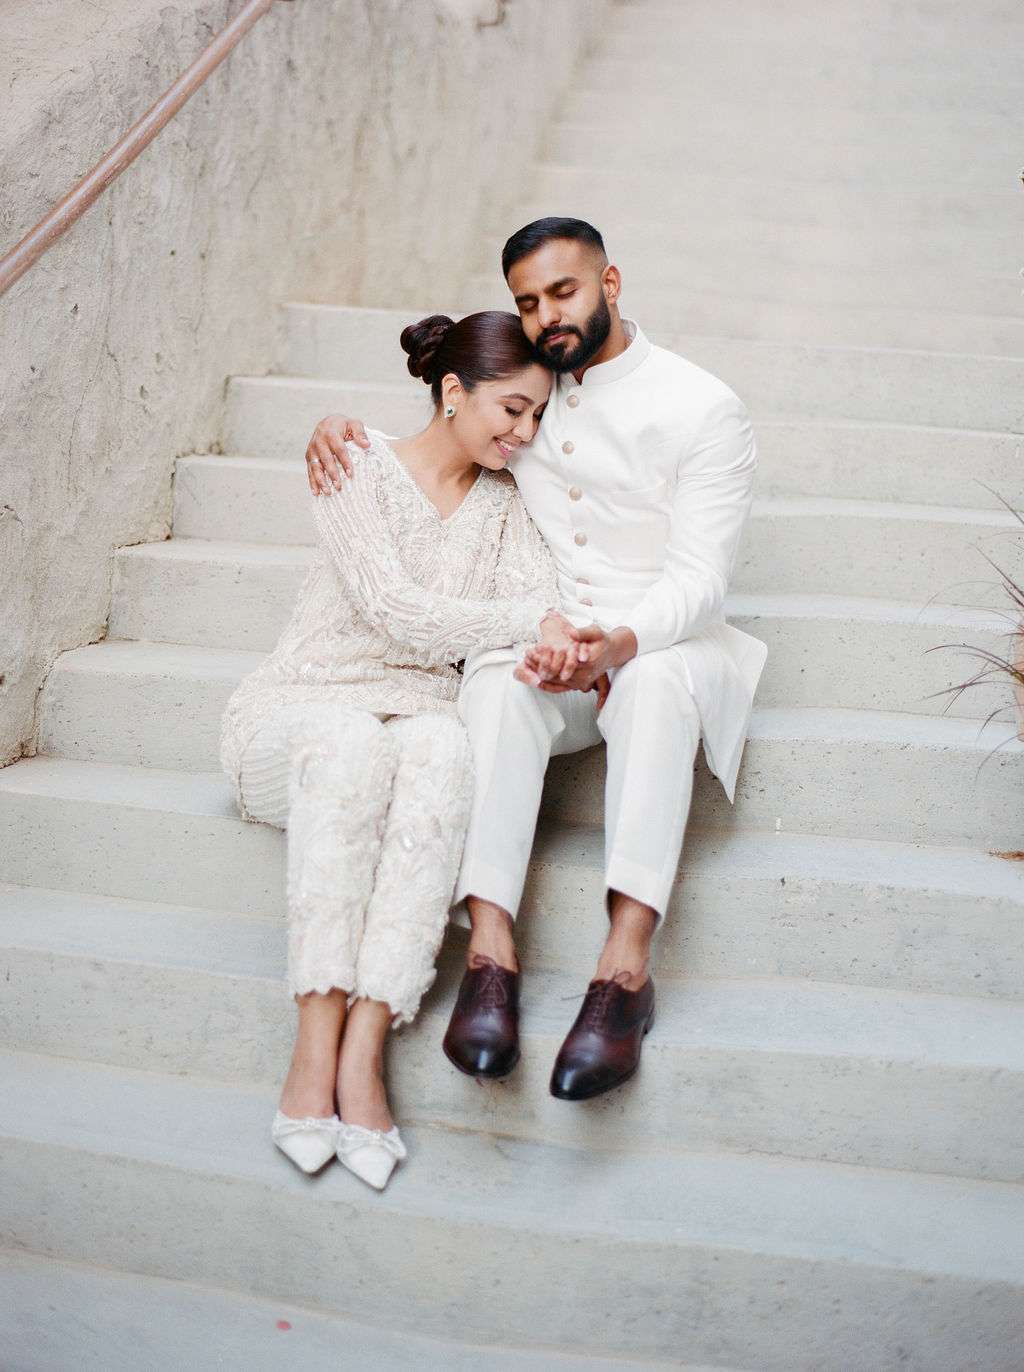 Neutral-Toned Wedding in Dubai Inspired by Their Indian & Pakistani Culture